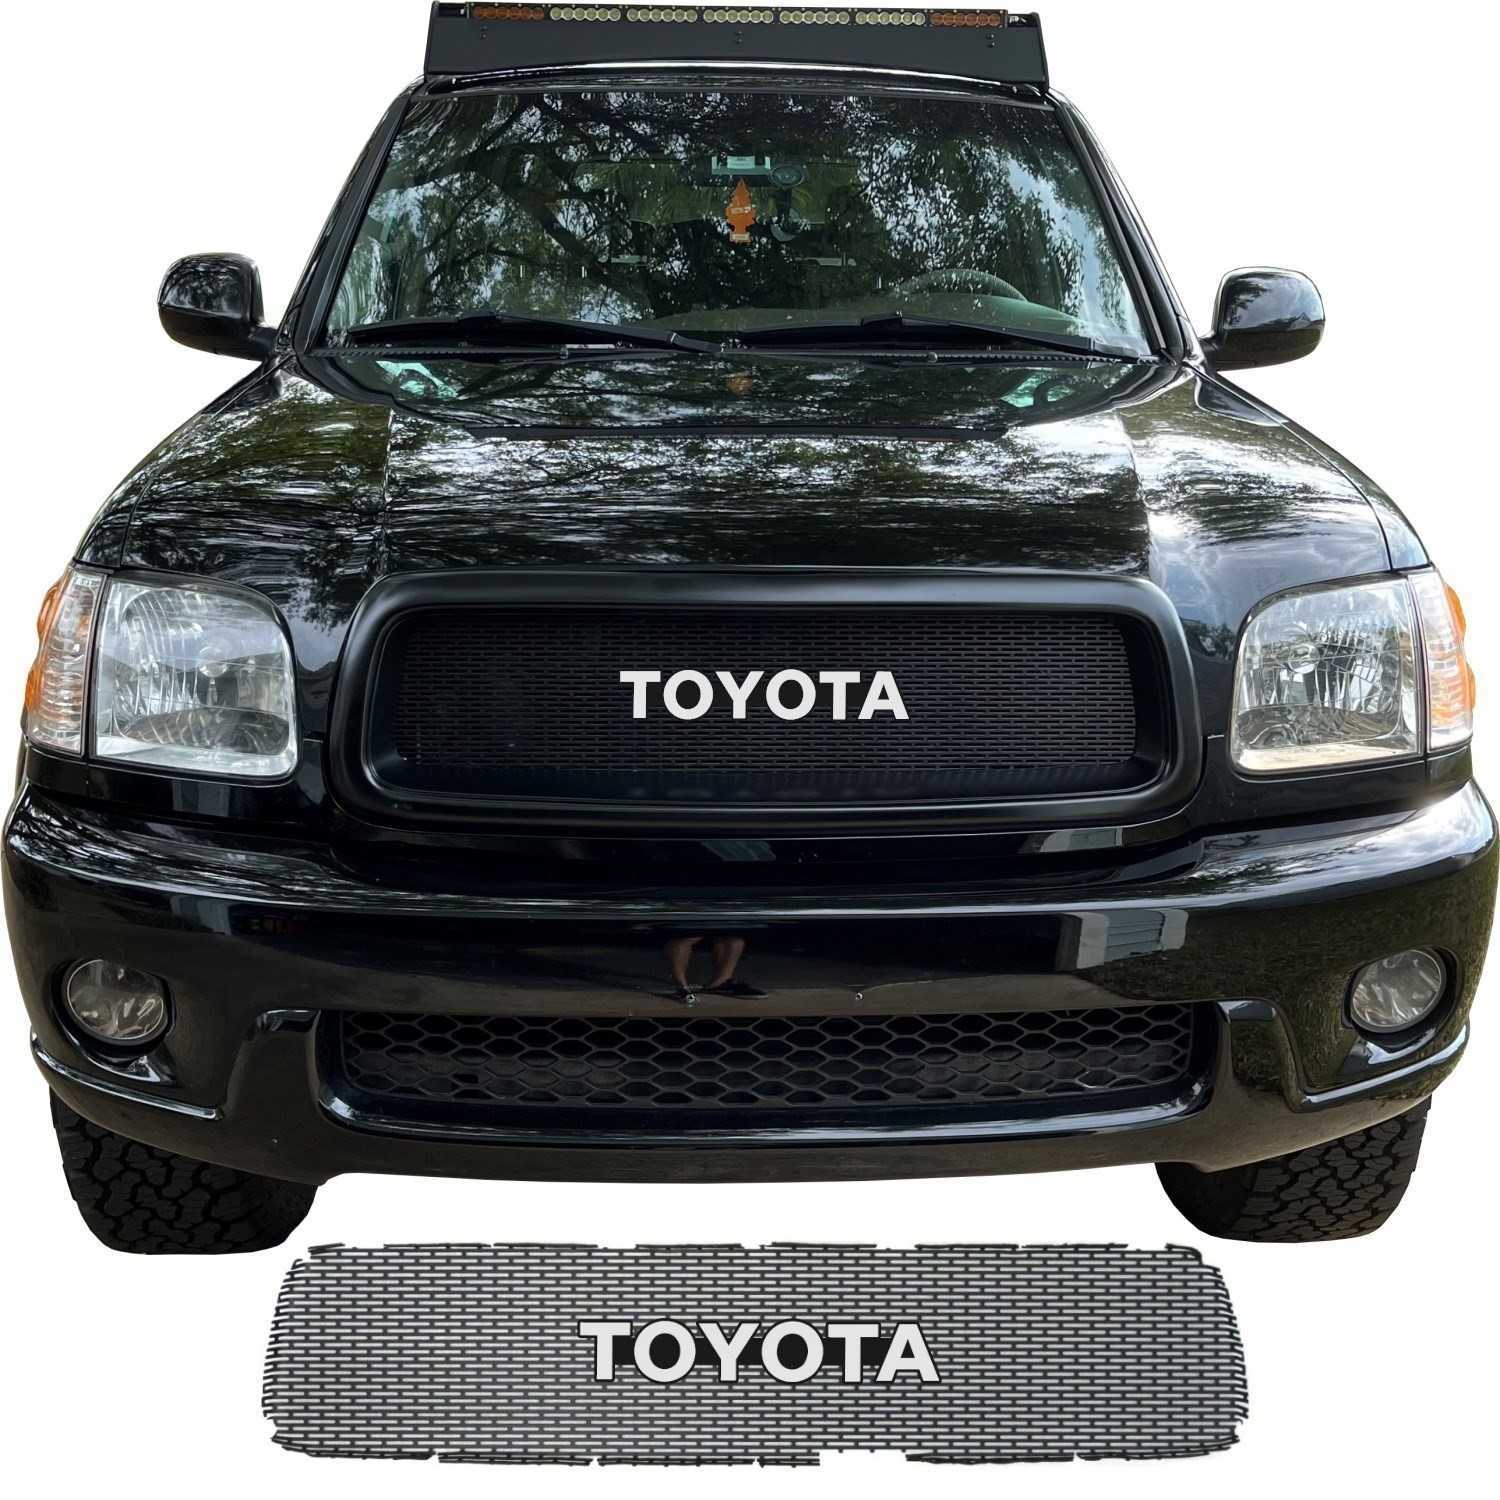 2001 - 2004 Toyota Sequoia Grill Mesh with Toyota Emblem